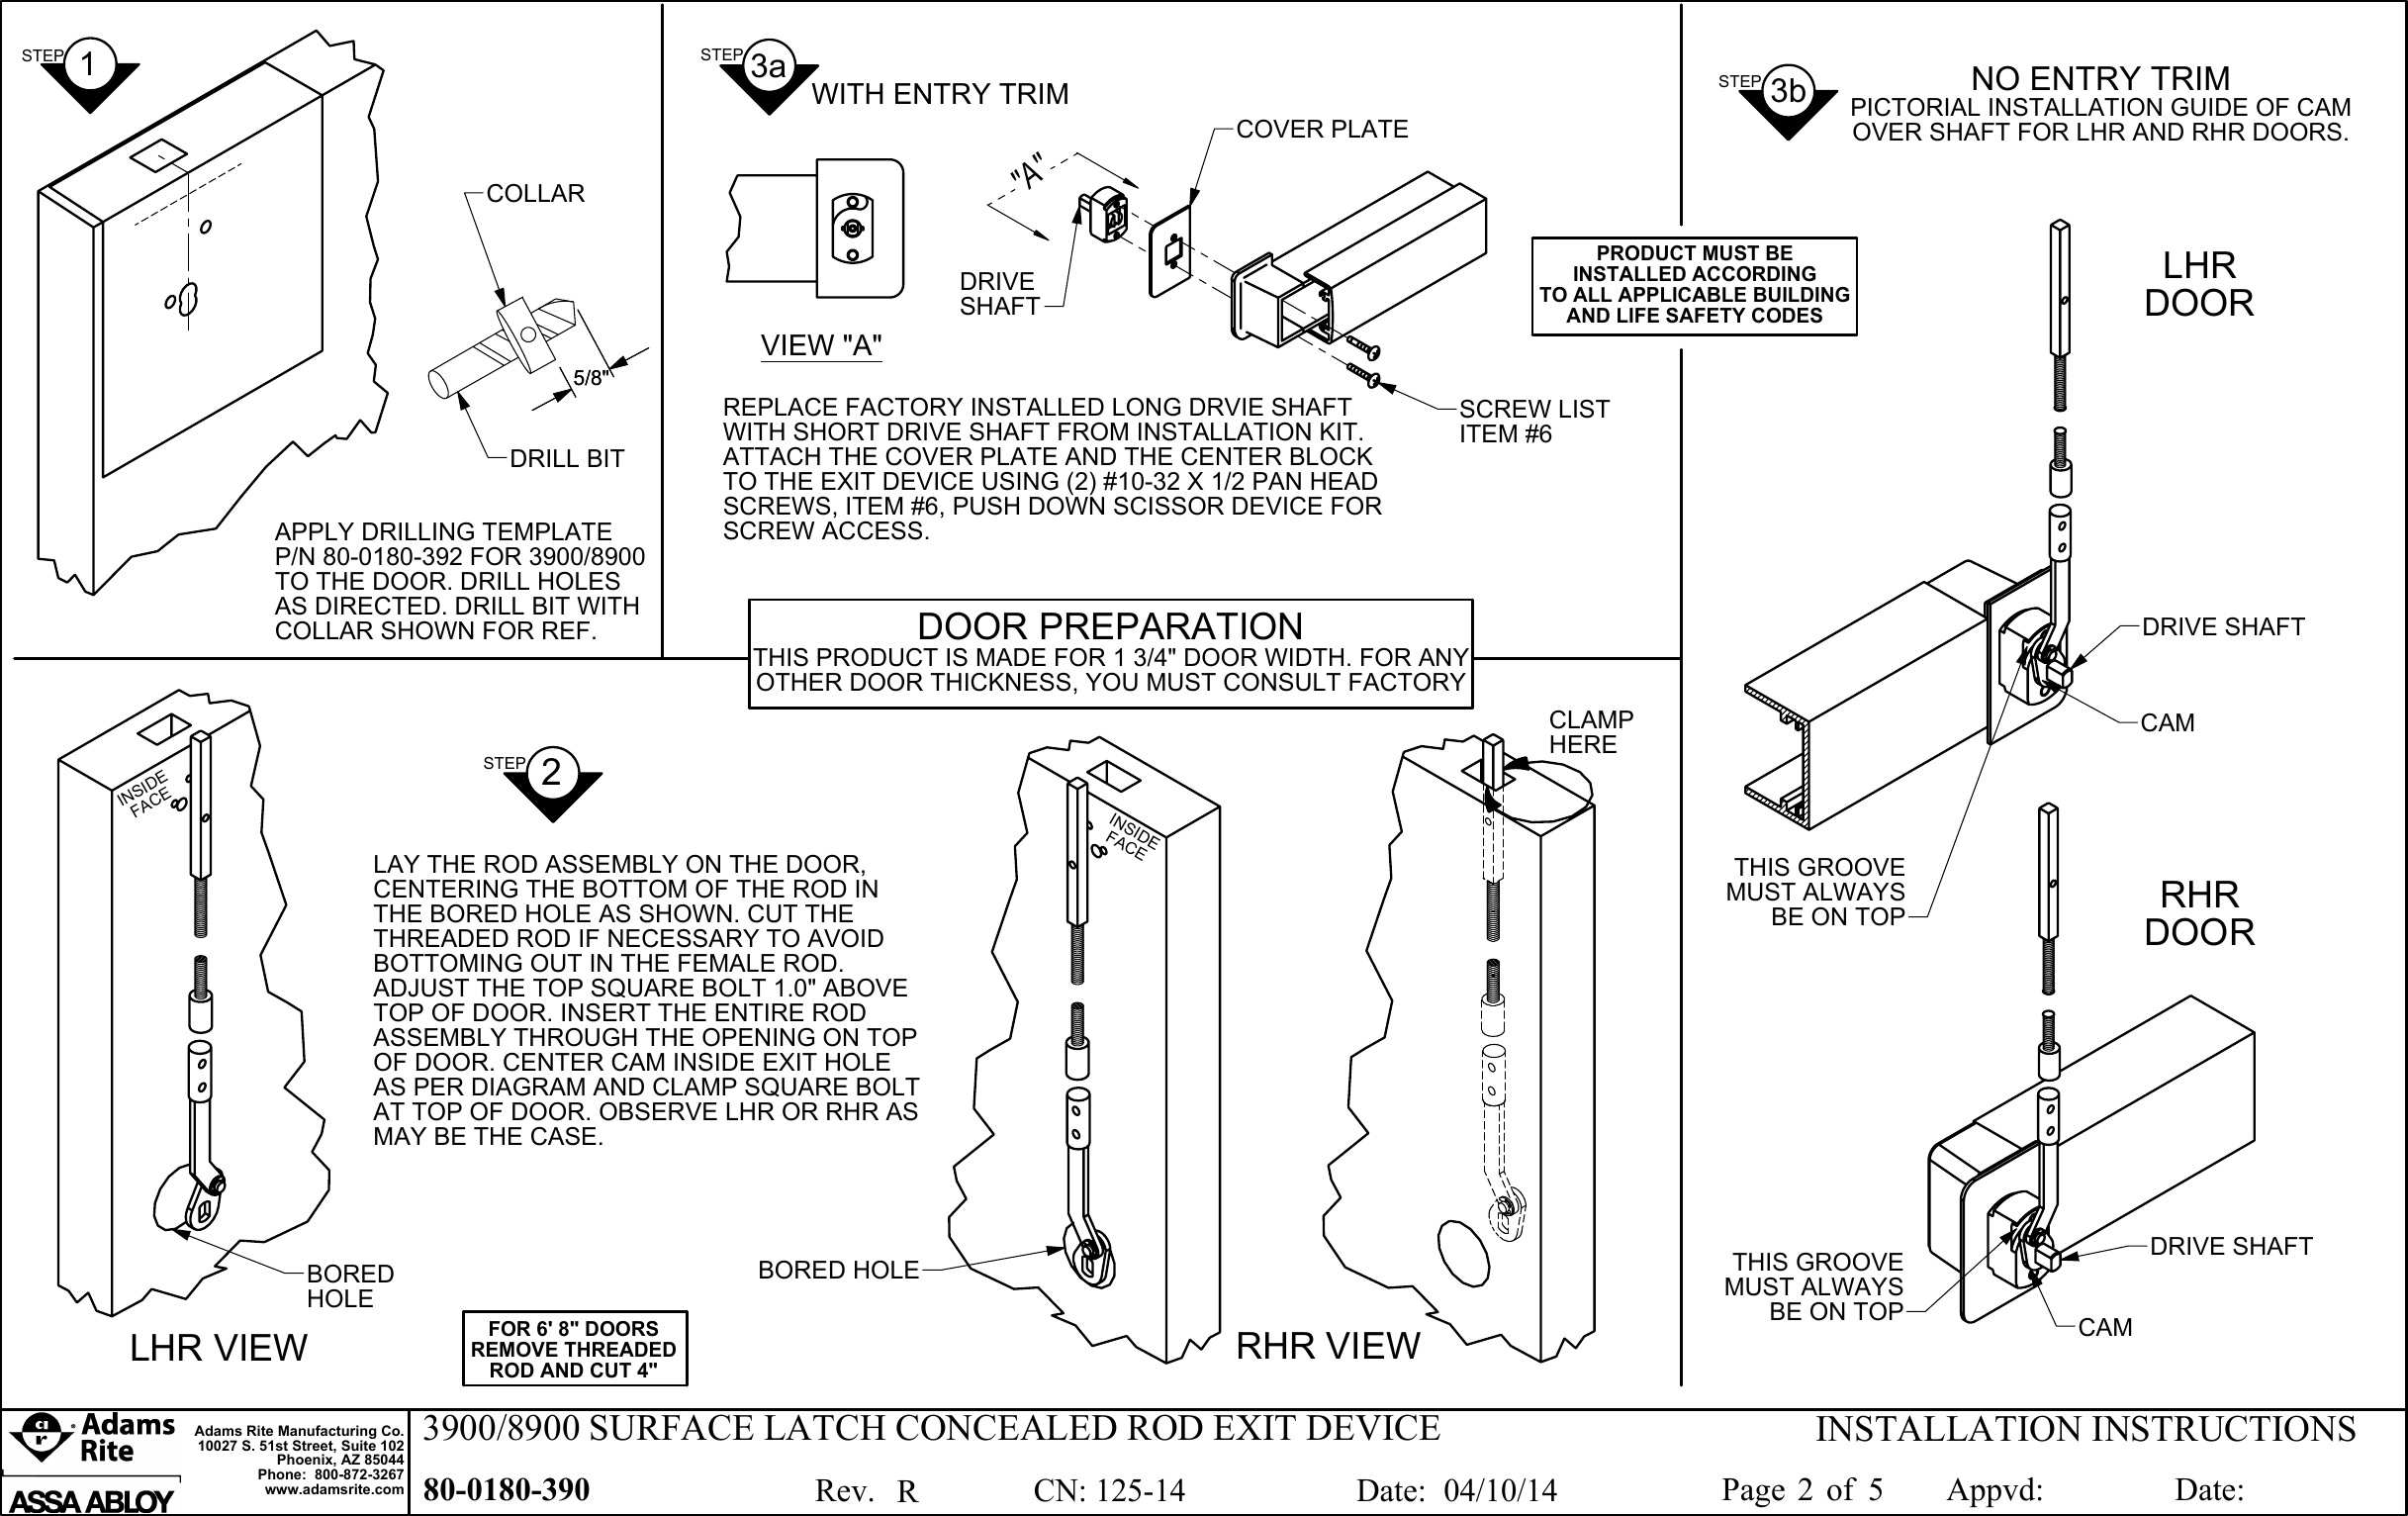 Page 2 of 5 - Adams Rite 80-0180-390_R 3900/8900 Surface Latch Concealed Rod Exit Device Installation Instructions 3900 8900 80-0180-390 R